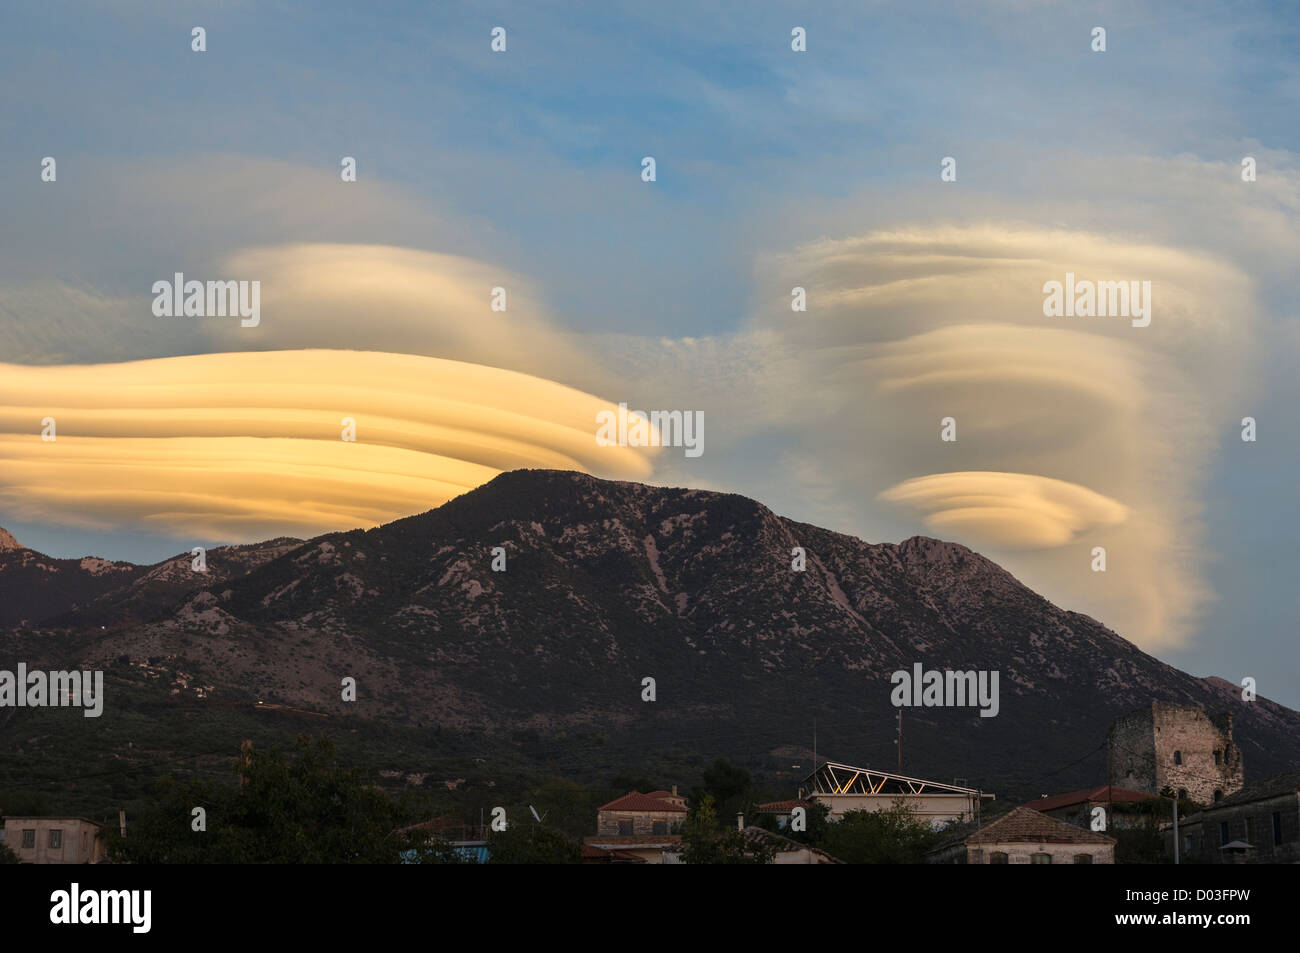 Lenticular clouds forming at sunset over the Taygetus mountains, in the Outer Mani, Peloponnese, Greece. Stock Photo